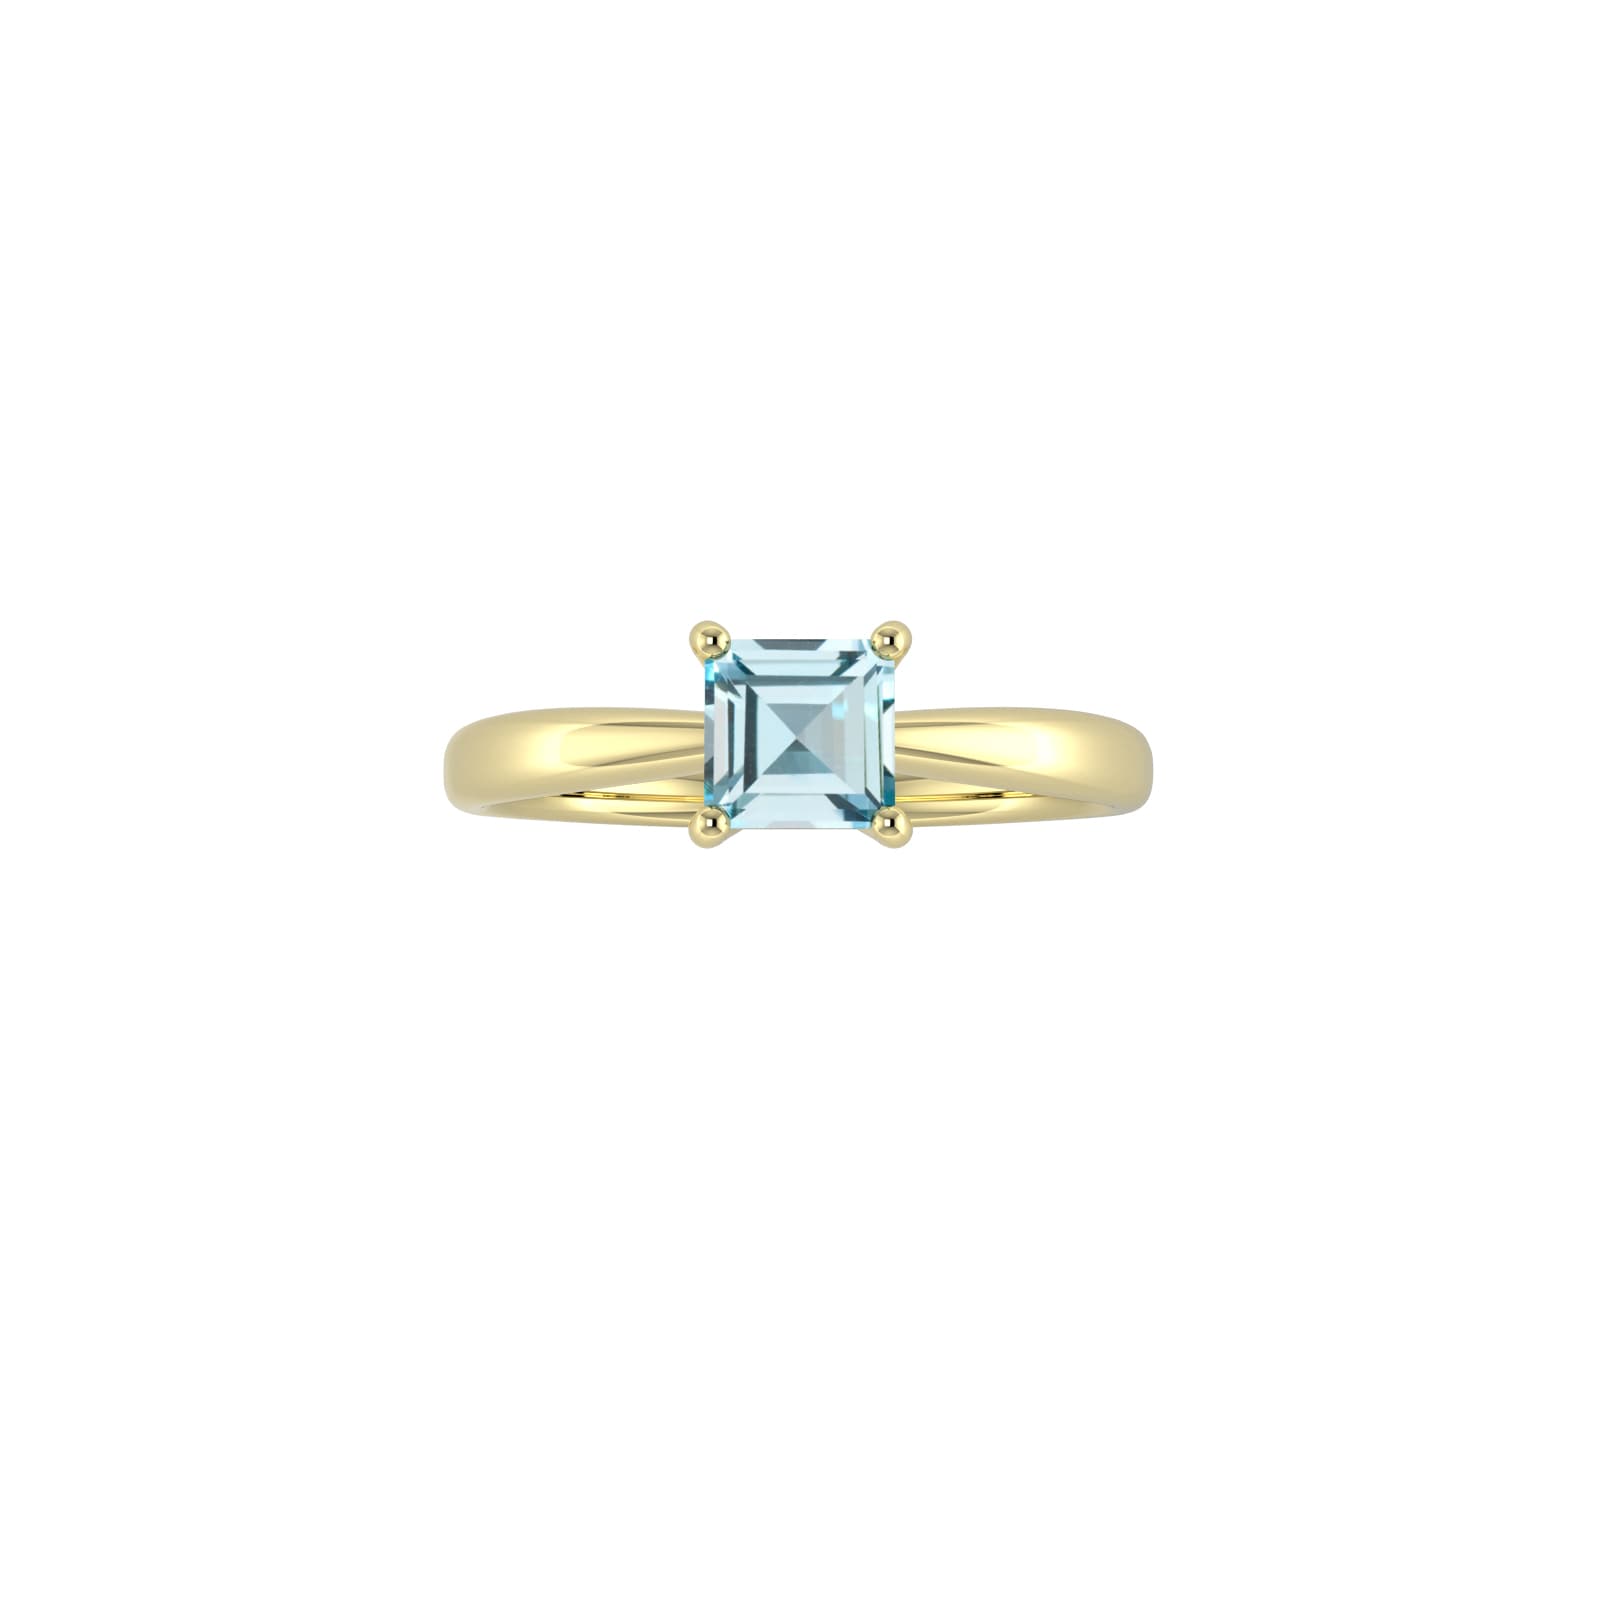 9ct Yellow Gold 4 Claw Square Aquamarine 5mm x 5mm Ring- Ring Size O